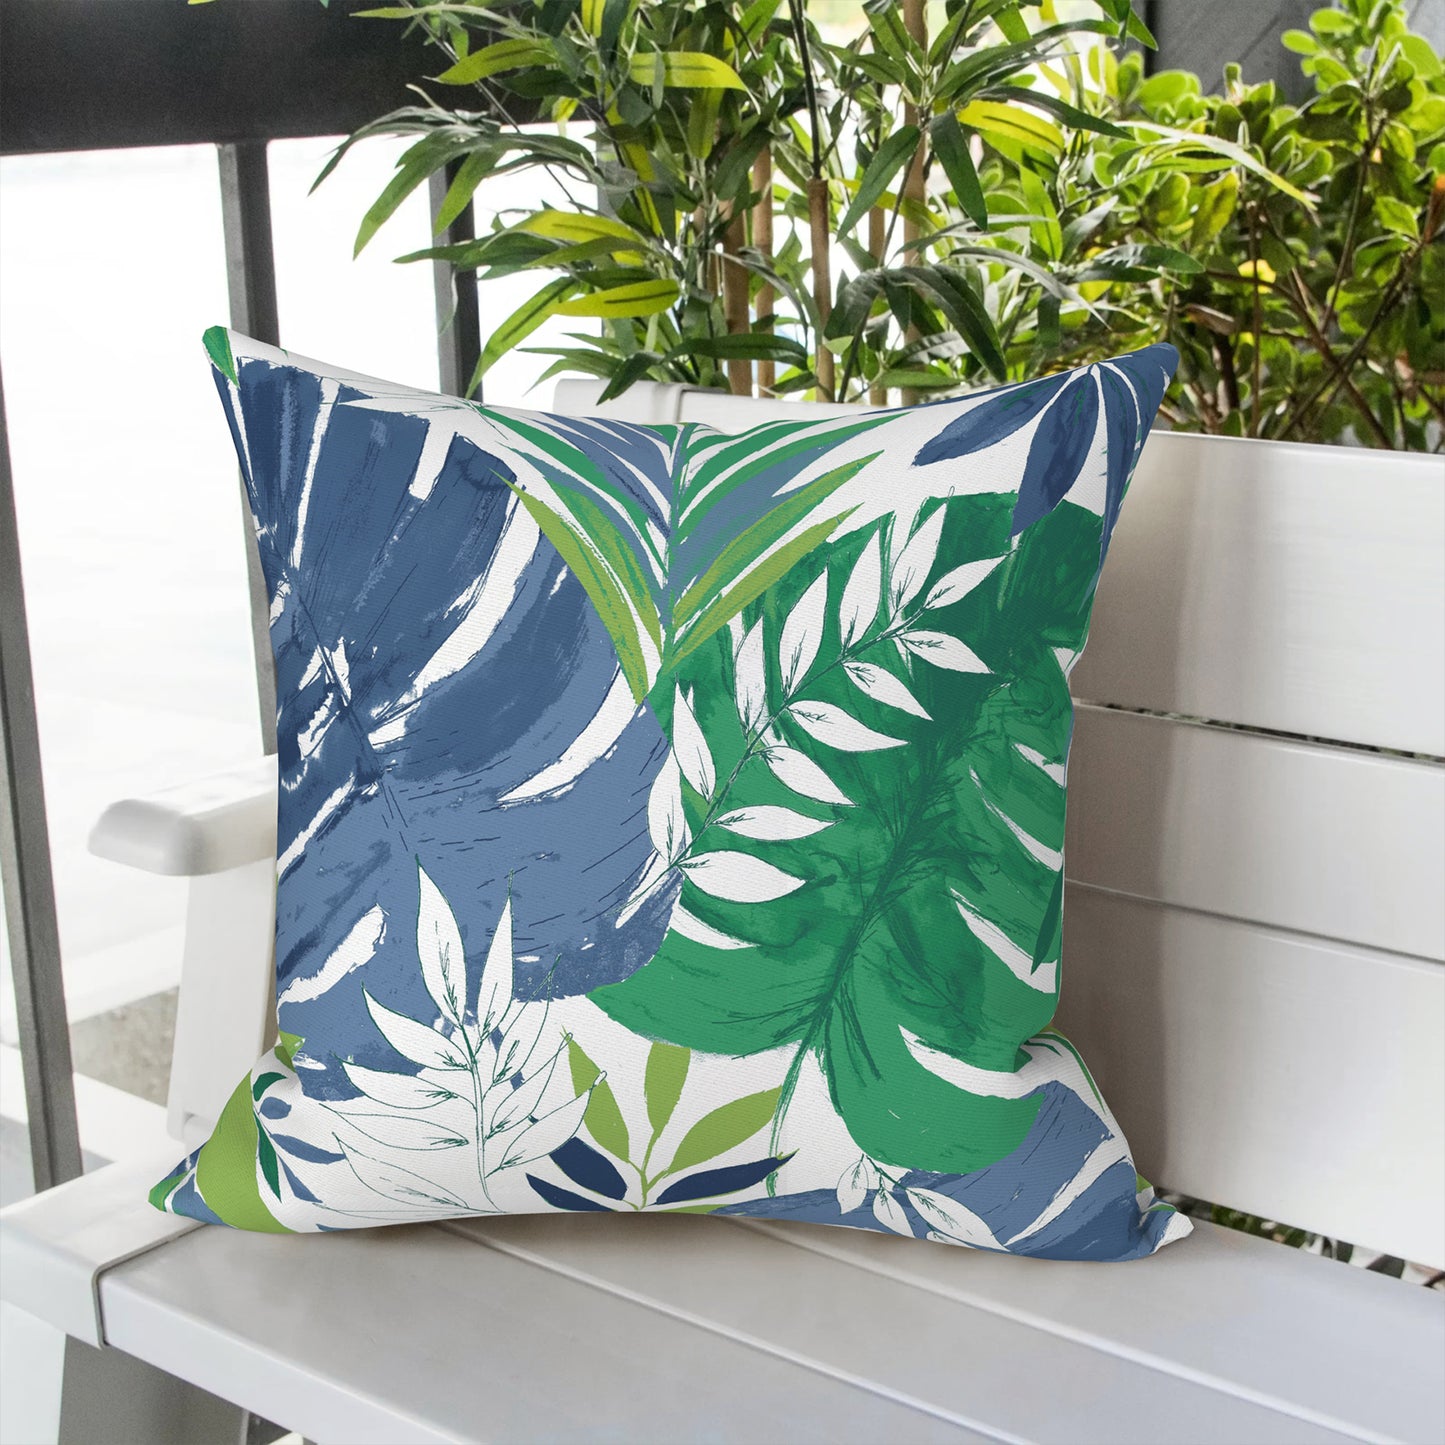 Melody Elephant Outdoor Throw Pillow Covers Pack of 2, Decorative Water Repellent Square Pillow Cases 18x18 Inch, Patio Pillowcases for Home Patio Furniture Use, Islamorada Blue Green